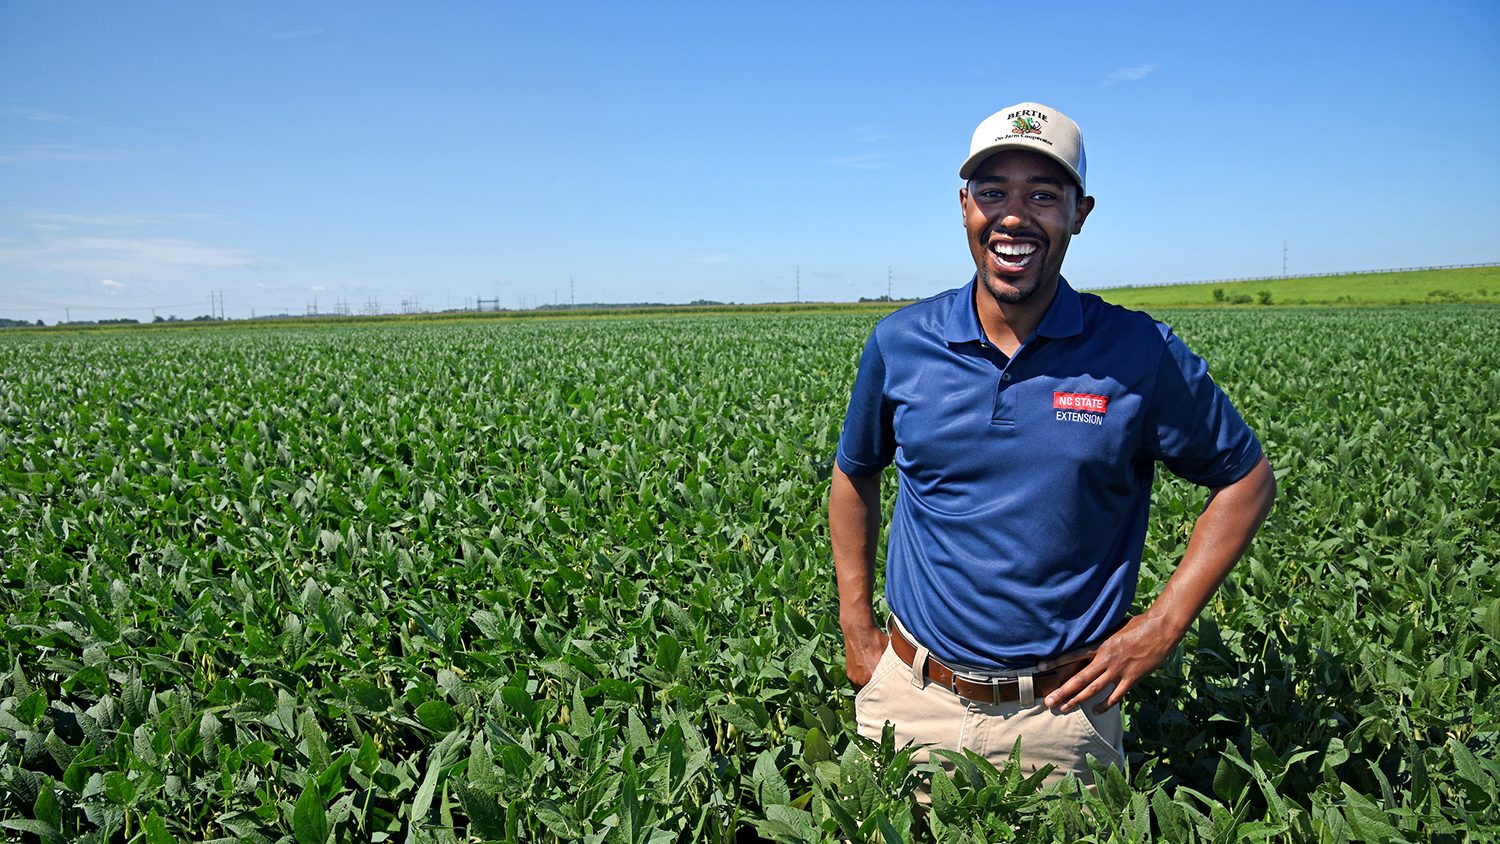 Extension employee standing in a field